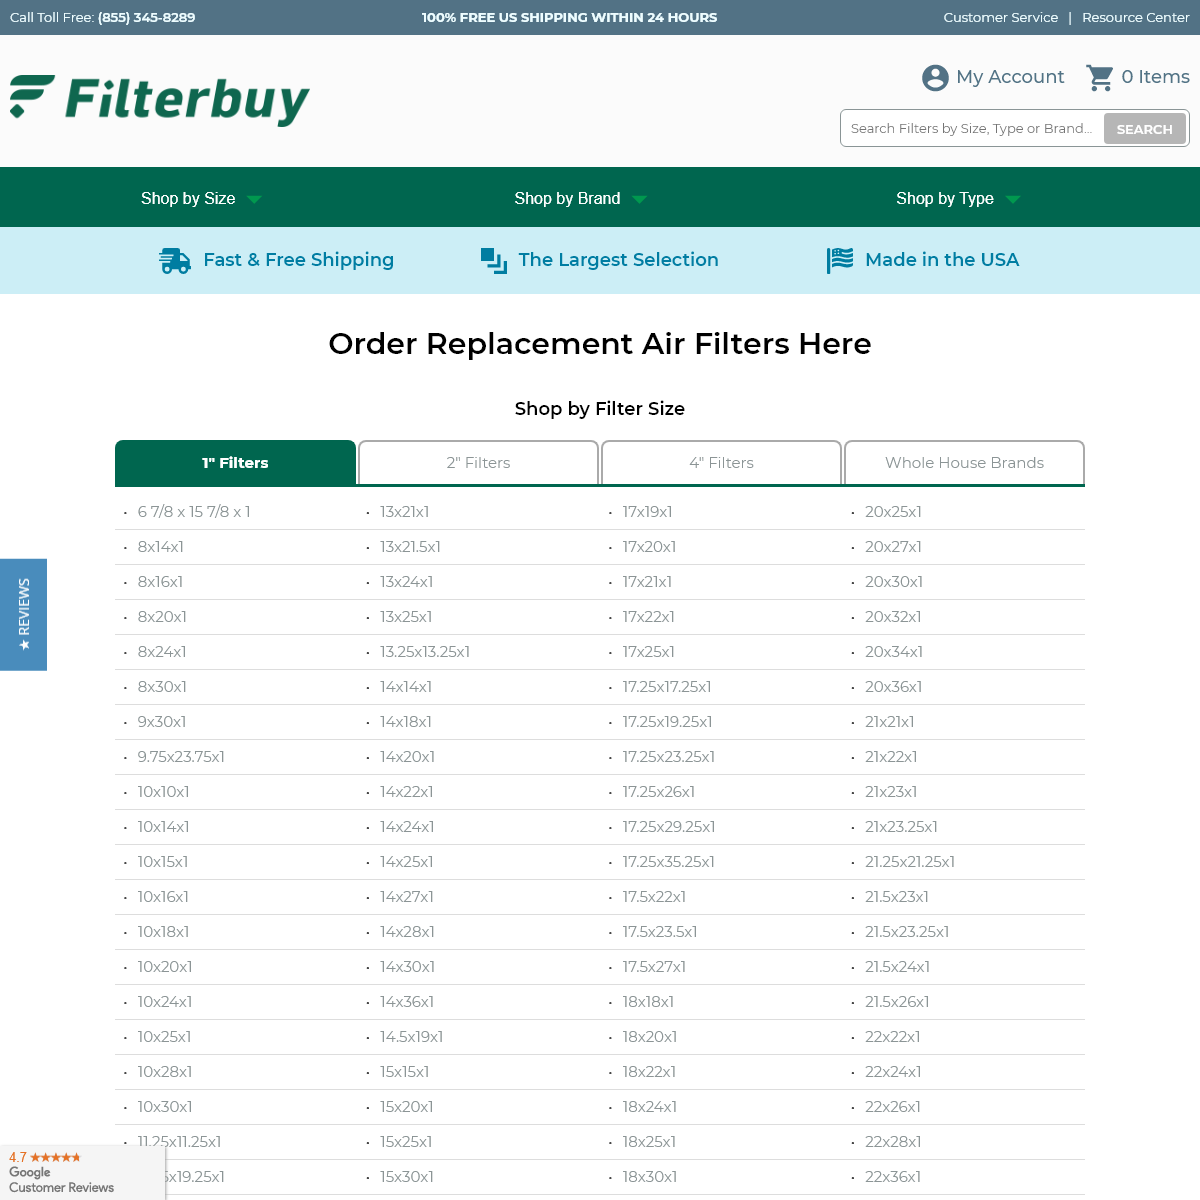 A complete backup of filterbuy.com